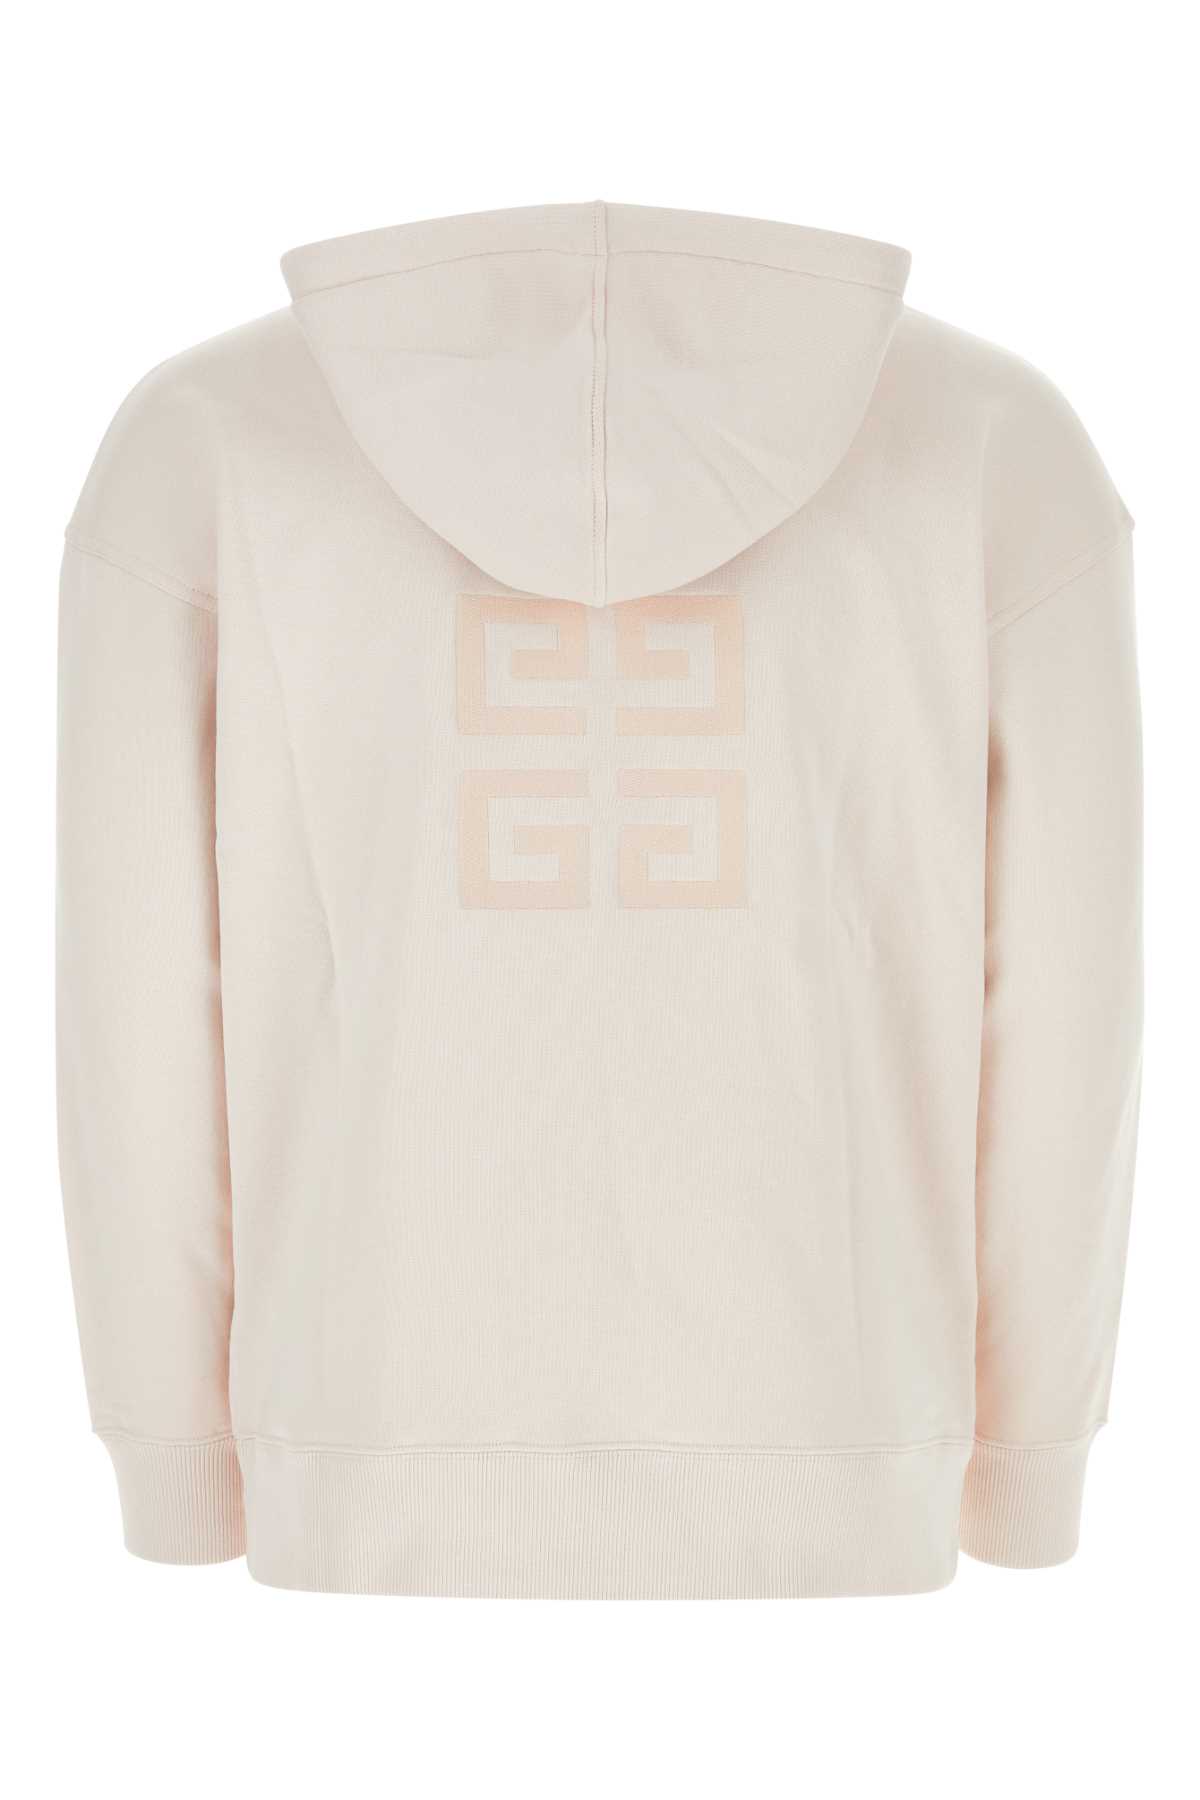 Shop Givenchy Pastel Pink Cotton Sweatshirt In Nudepink